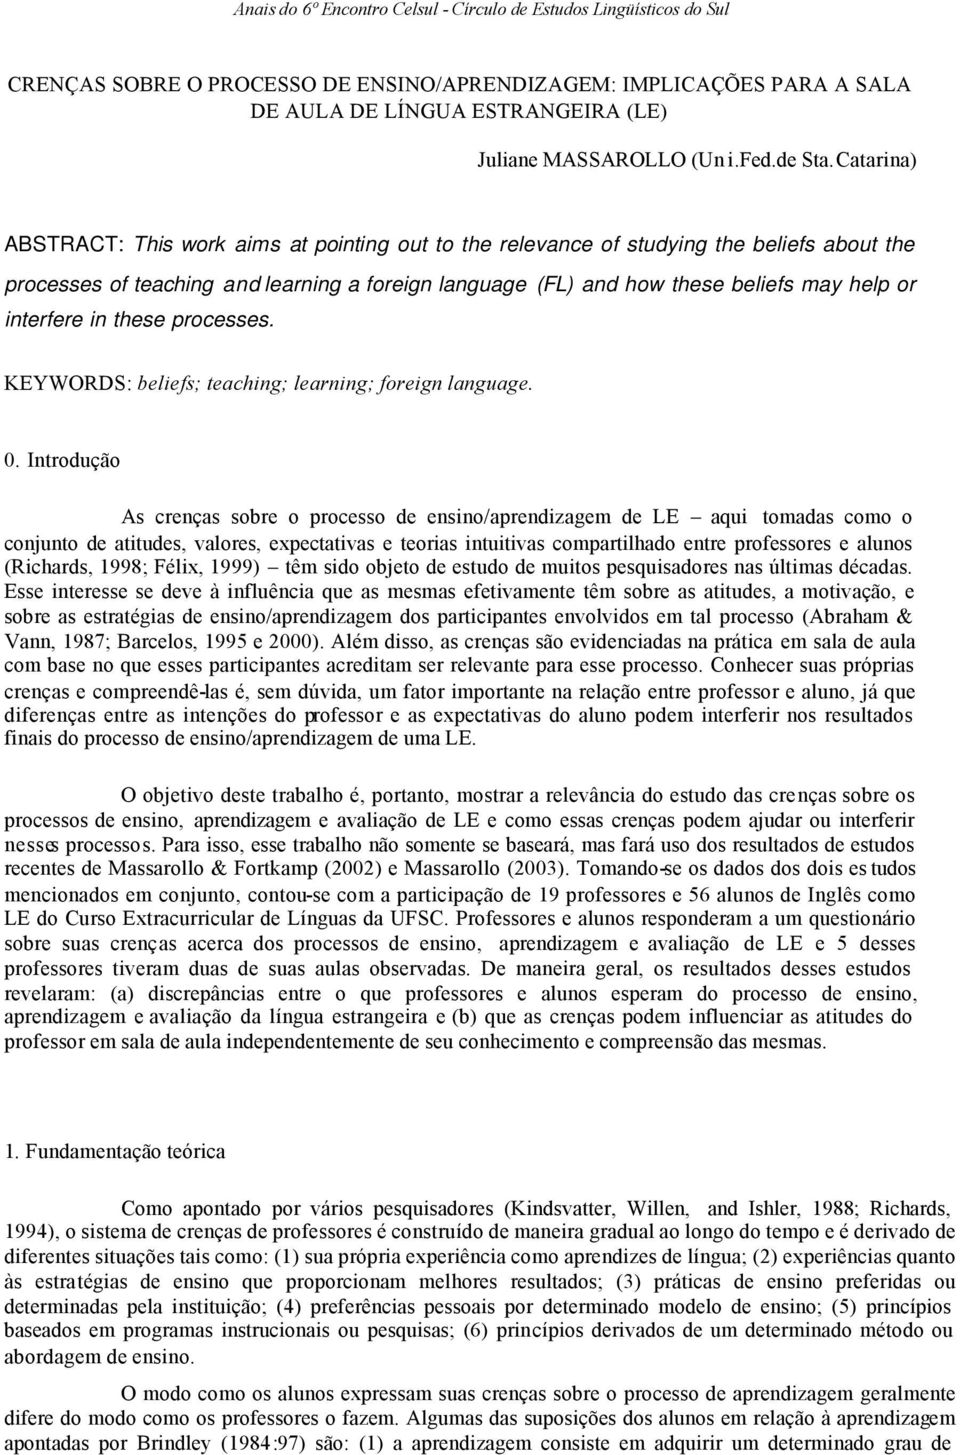 Catarina) ABSTRACT: This work aims at pointing out to the relevance of studying the beliefs about the processes of teaching and learning a foreign language (FL) and how these beliefs may help or